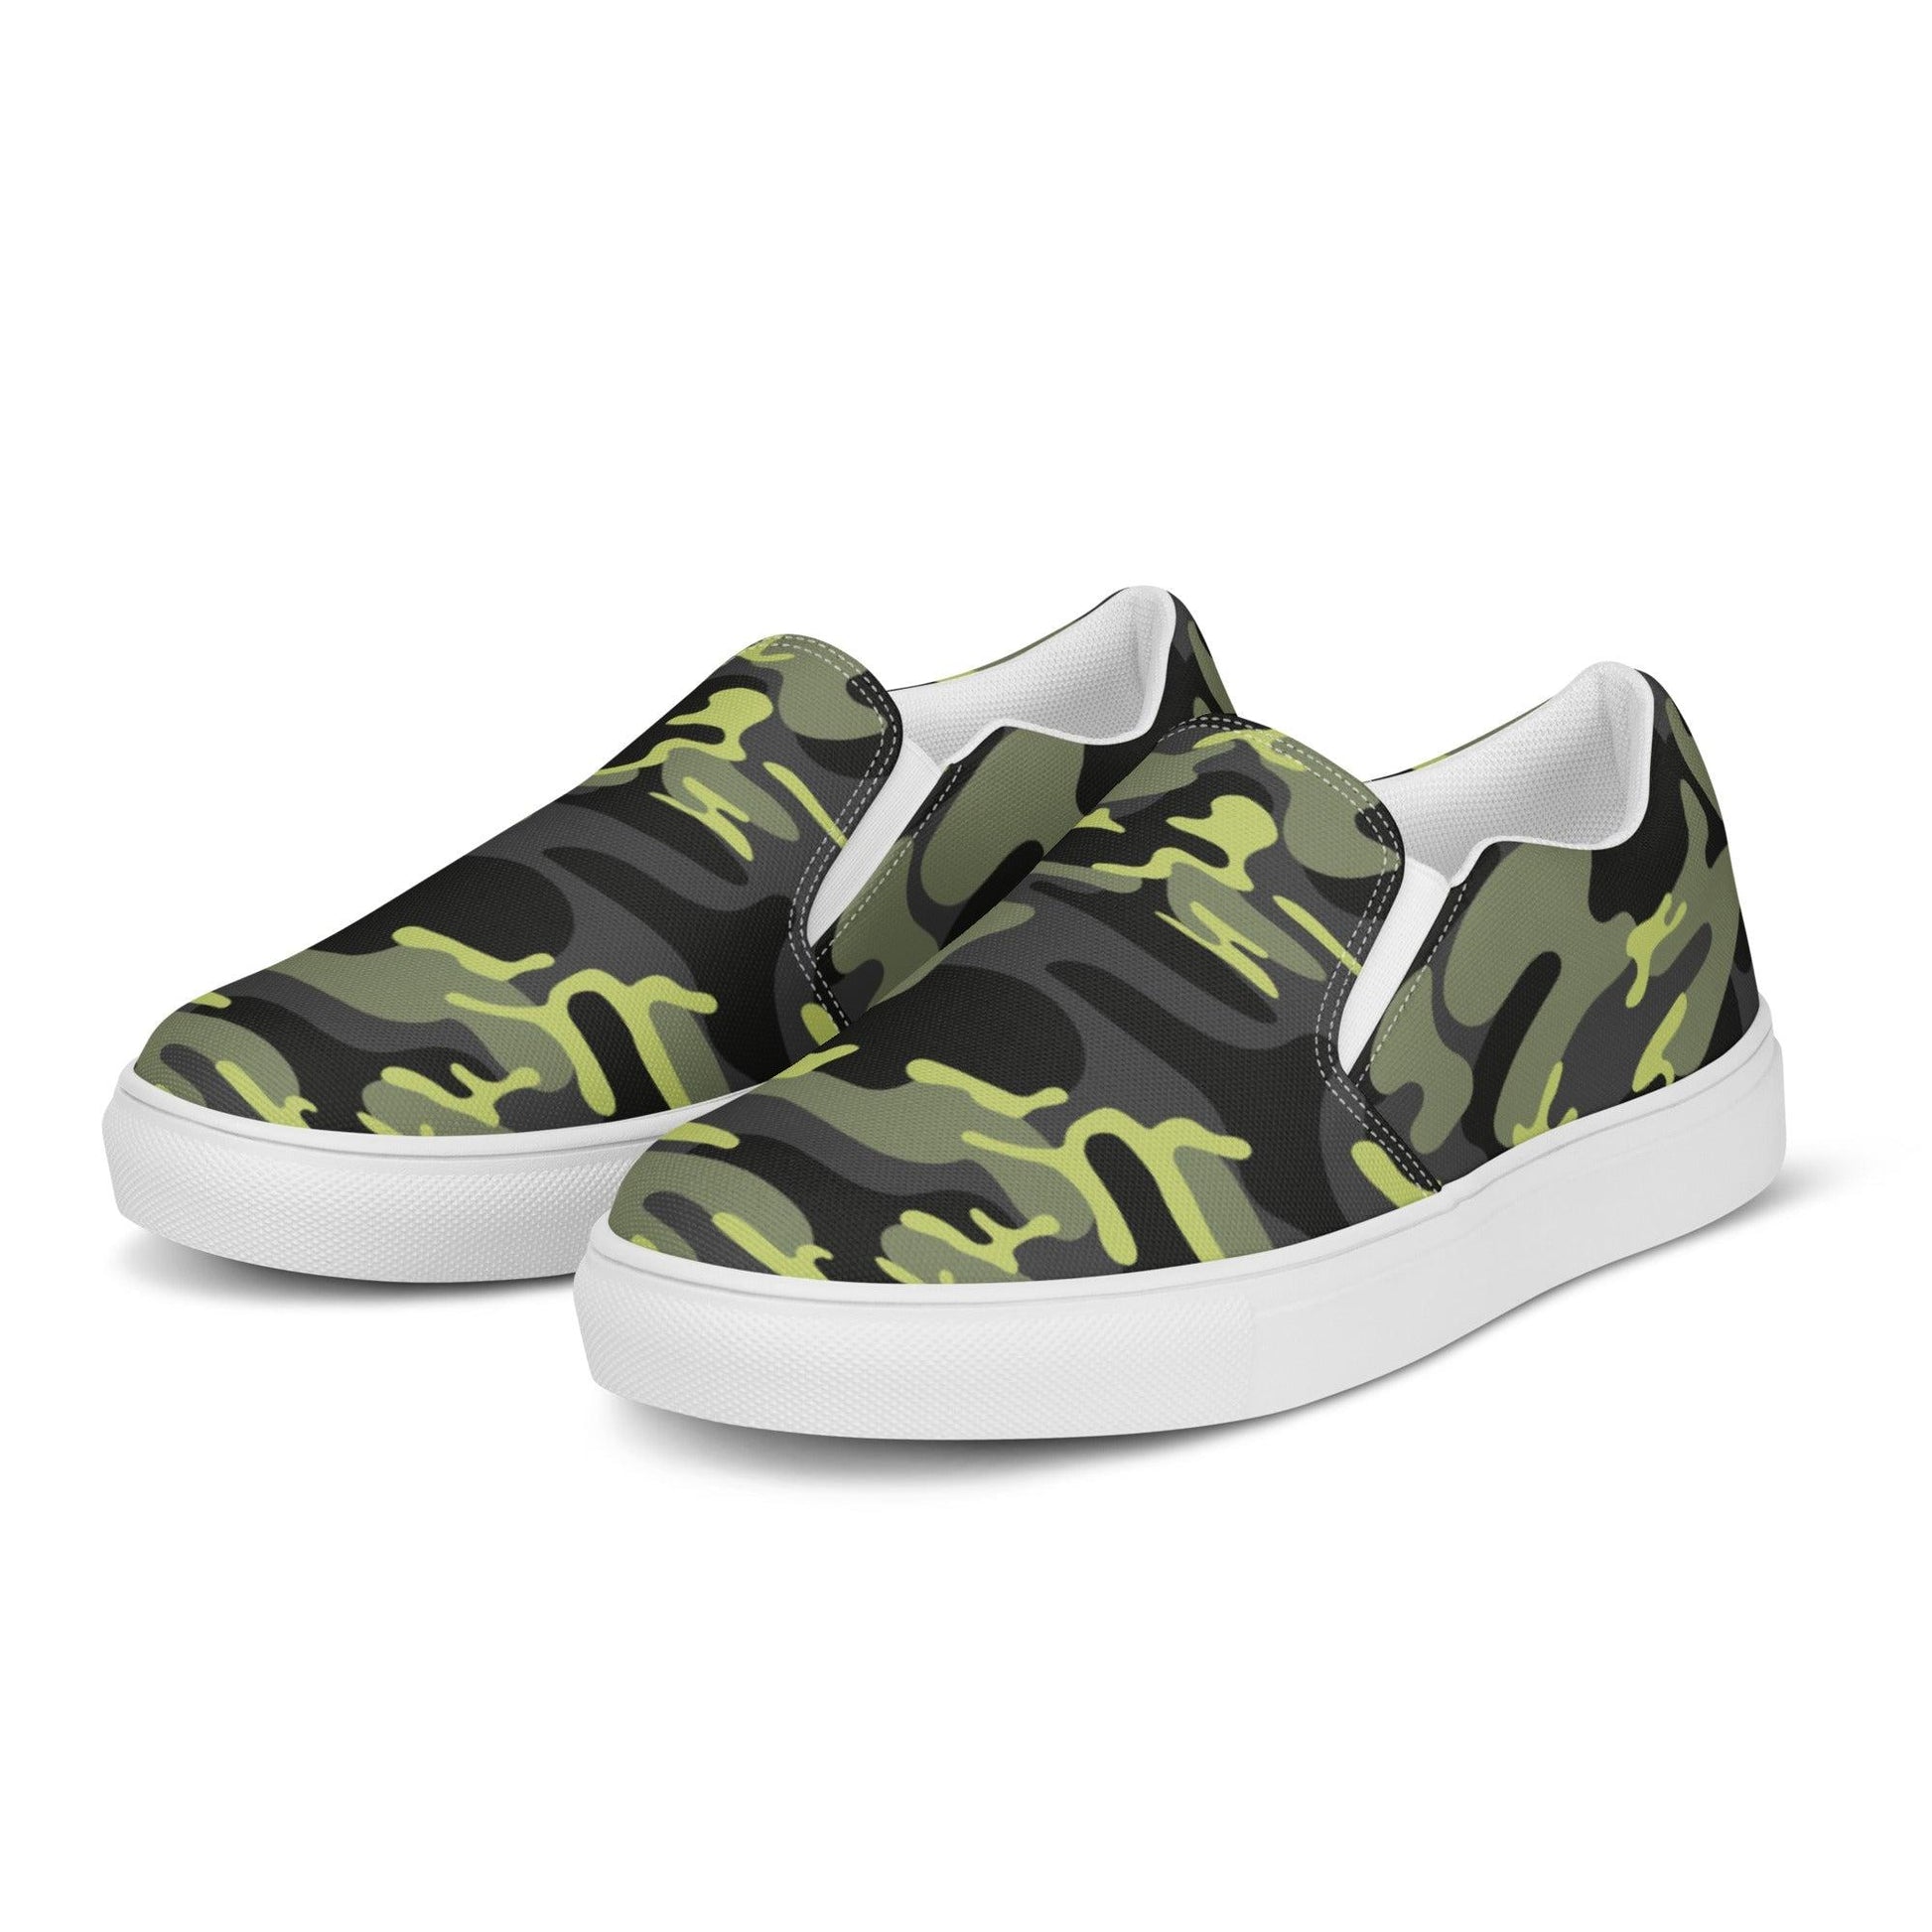 Army green men’s slip-on shoes | Shoes | Bee Prints